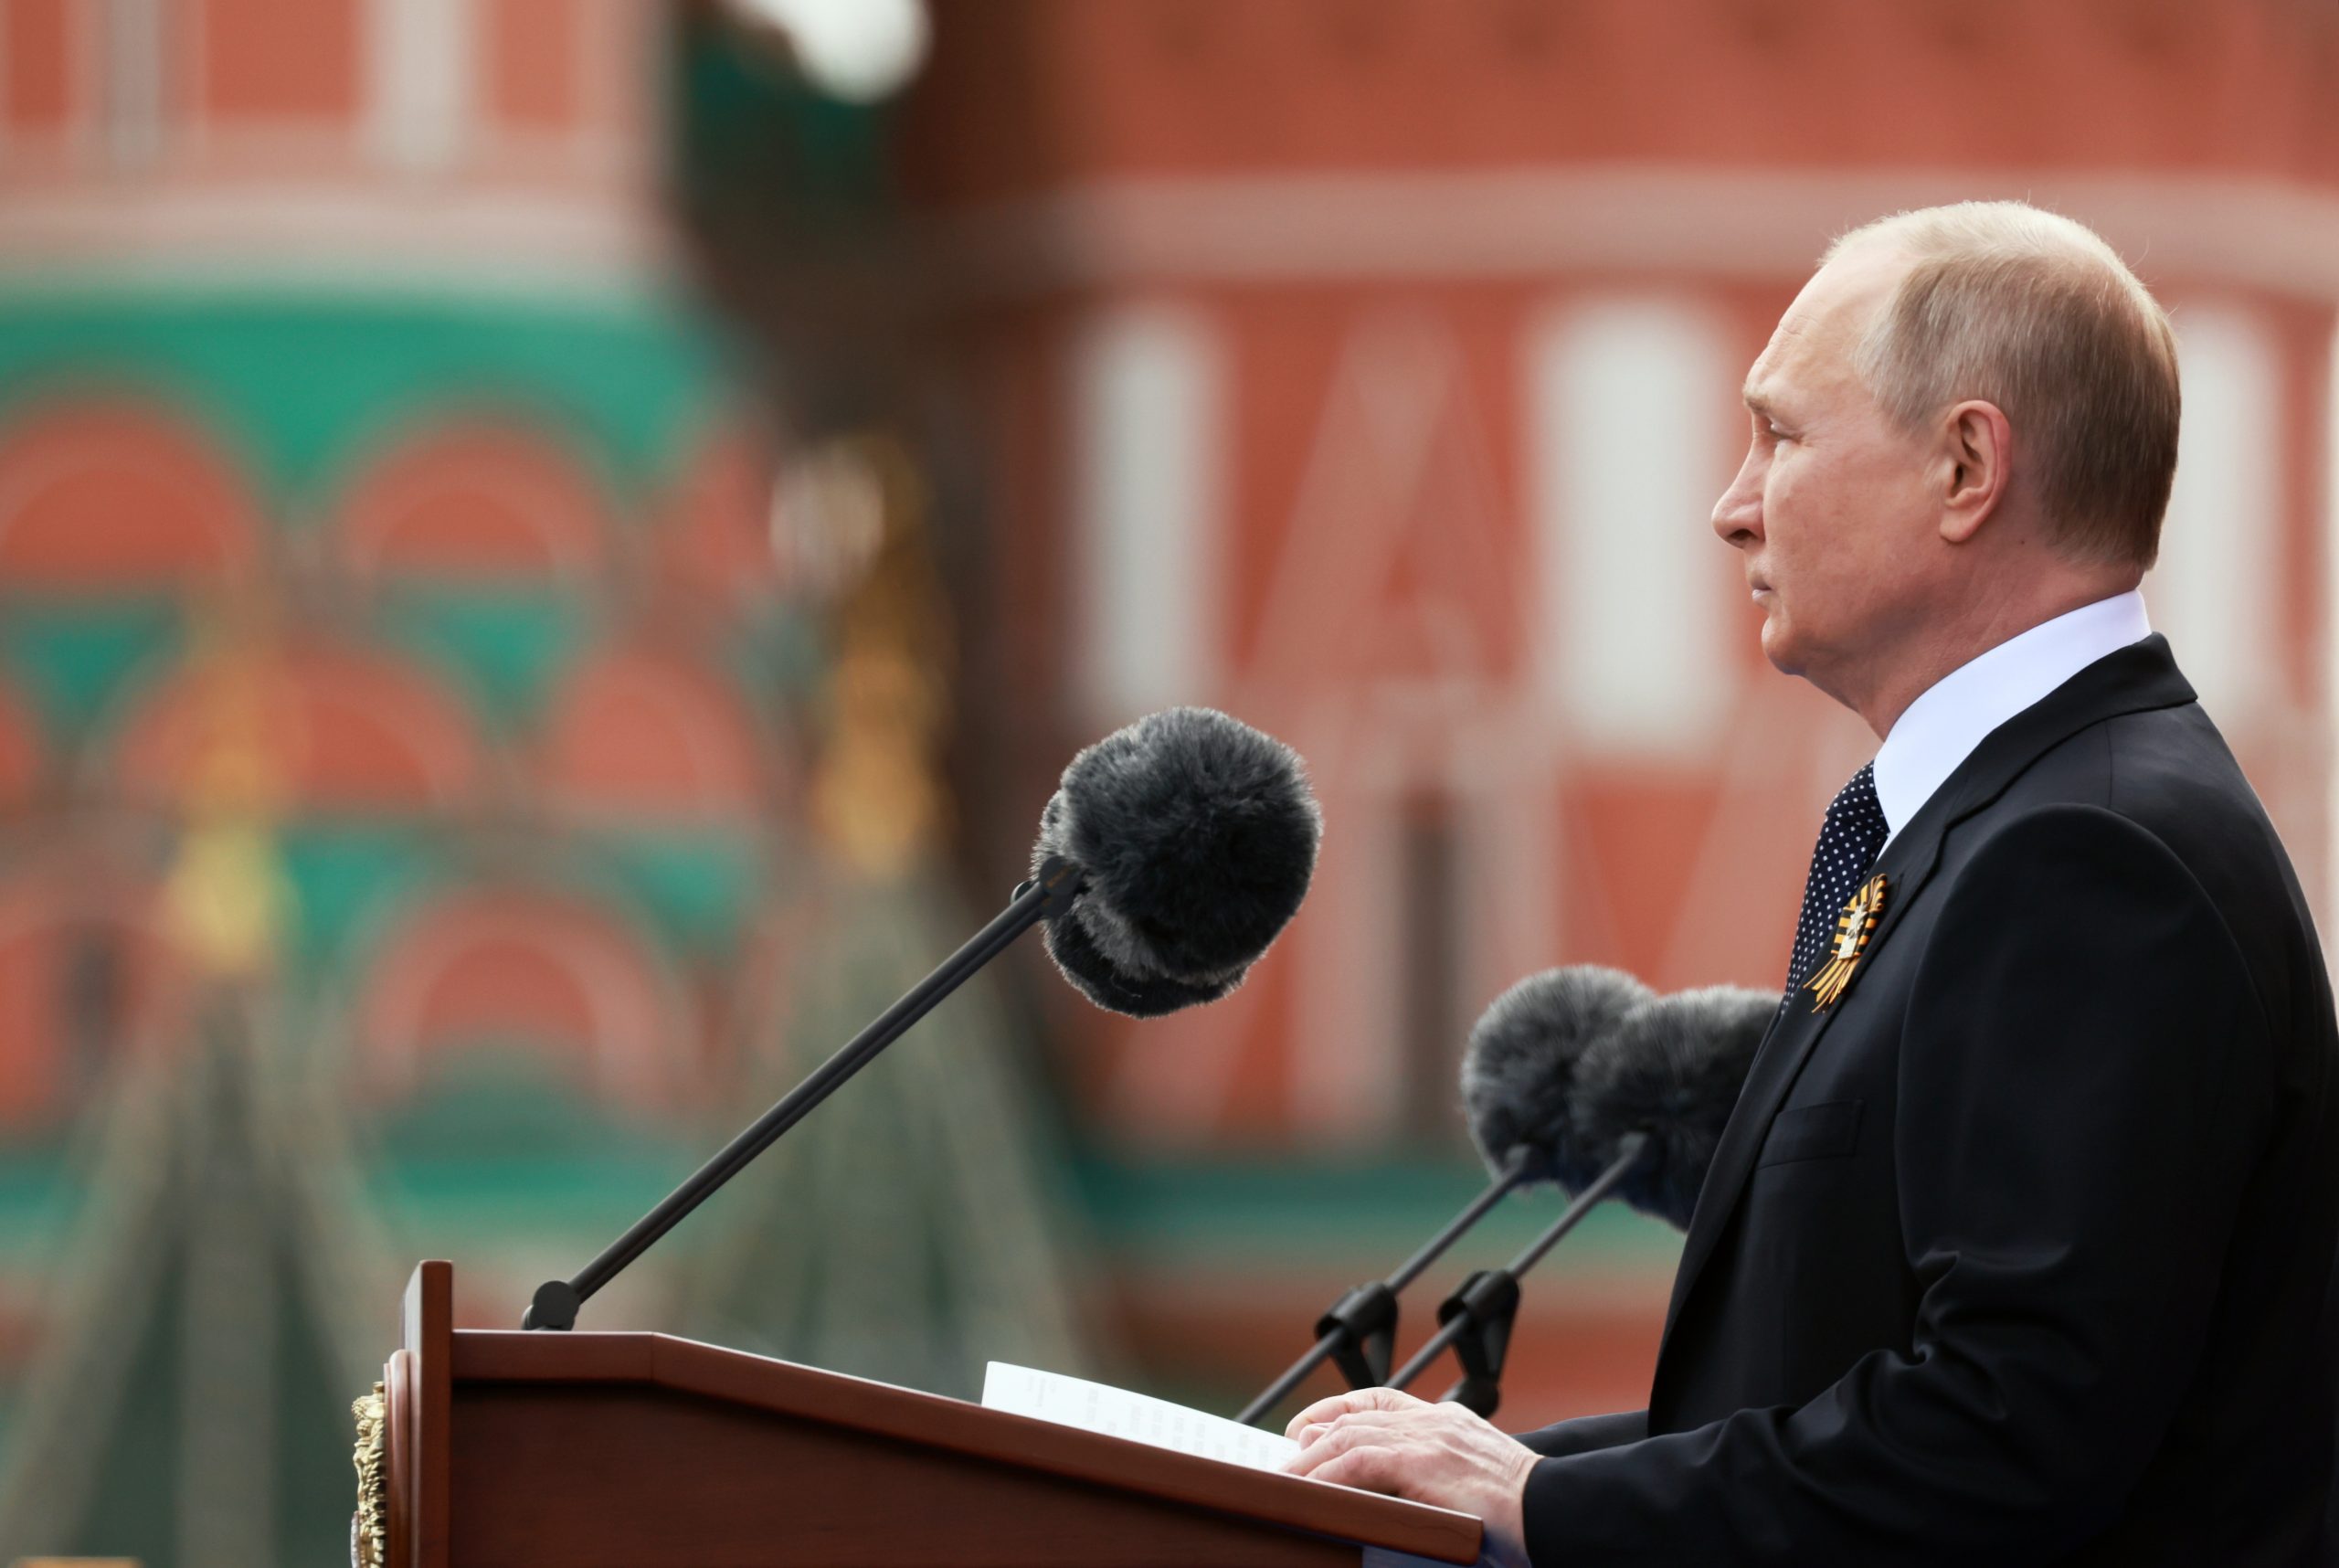 epa09935190 Russian President Vladimir Putin delivers a speech during the Victory Day military parade in the Red Square in Moscow, Russia, 09 May 2022. The Victory Day military parade takes place annualy to mark the victory of the Soviet Union over Nazi Germany in World War II.  EPA/MIKHAIL METZEL / KREMLIN POOL / SPUTNIK MANDATORY CREDIT